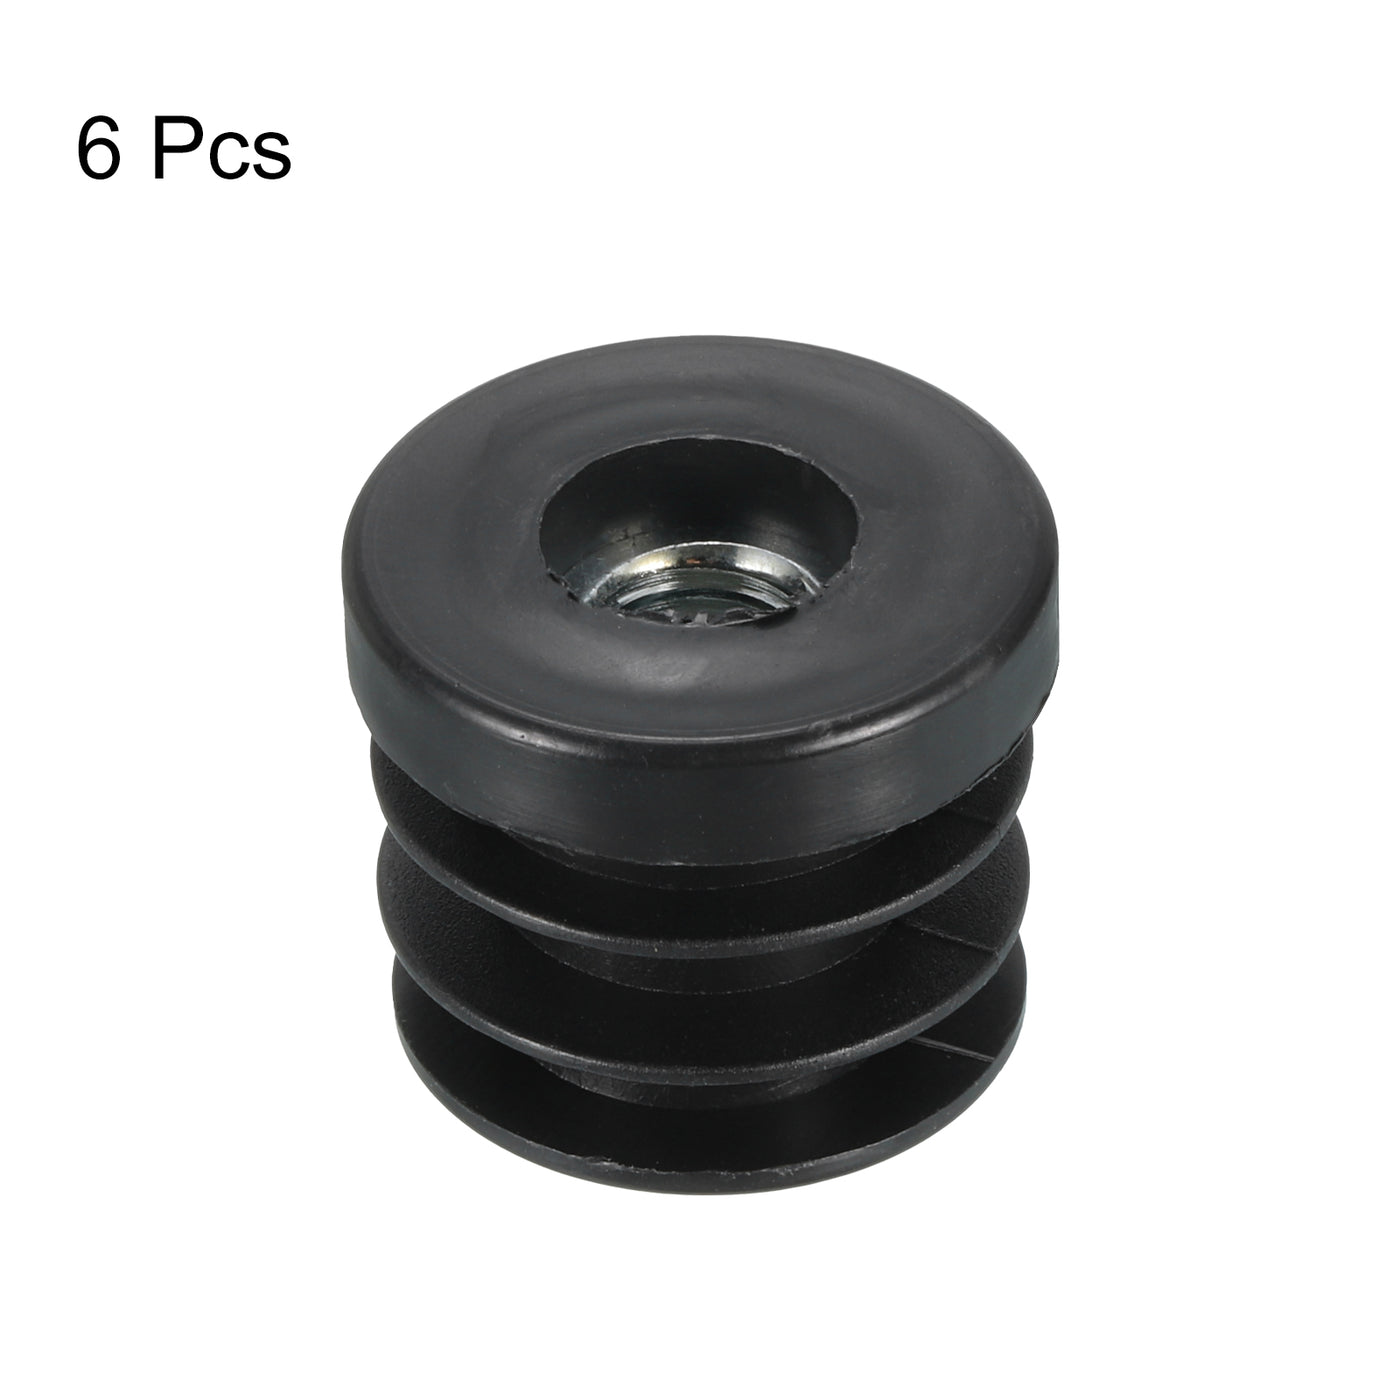 uxcell Uxcell 6Pcs Caster Insert with Thread, 30mm/1.18" M10 Thread for Furniture